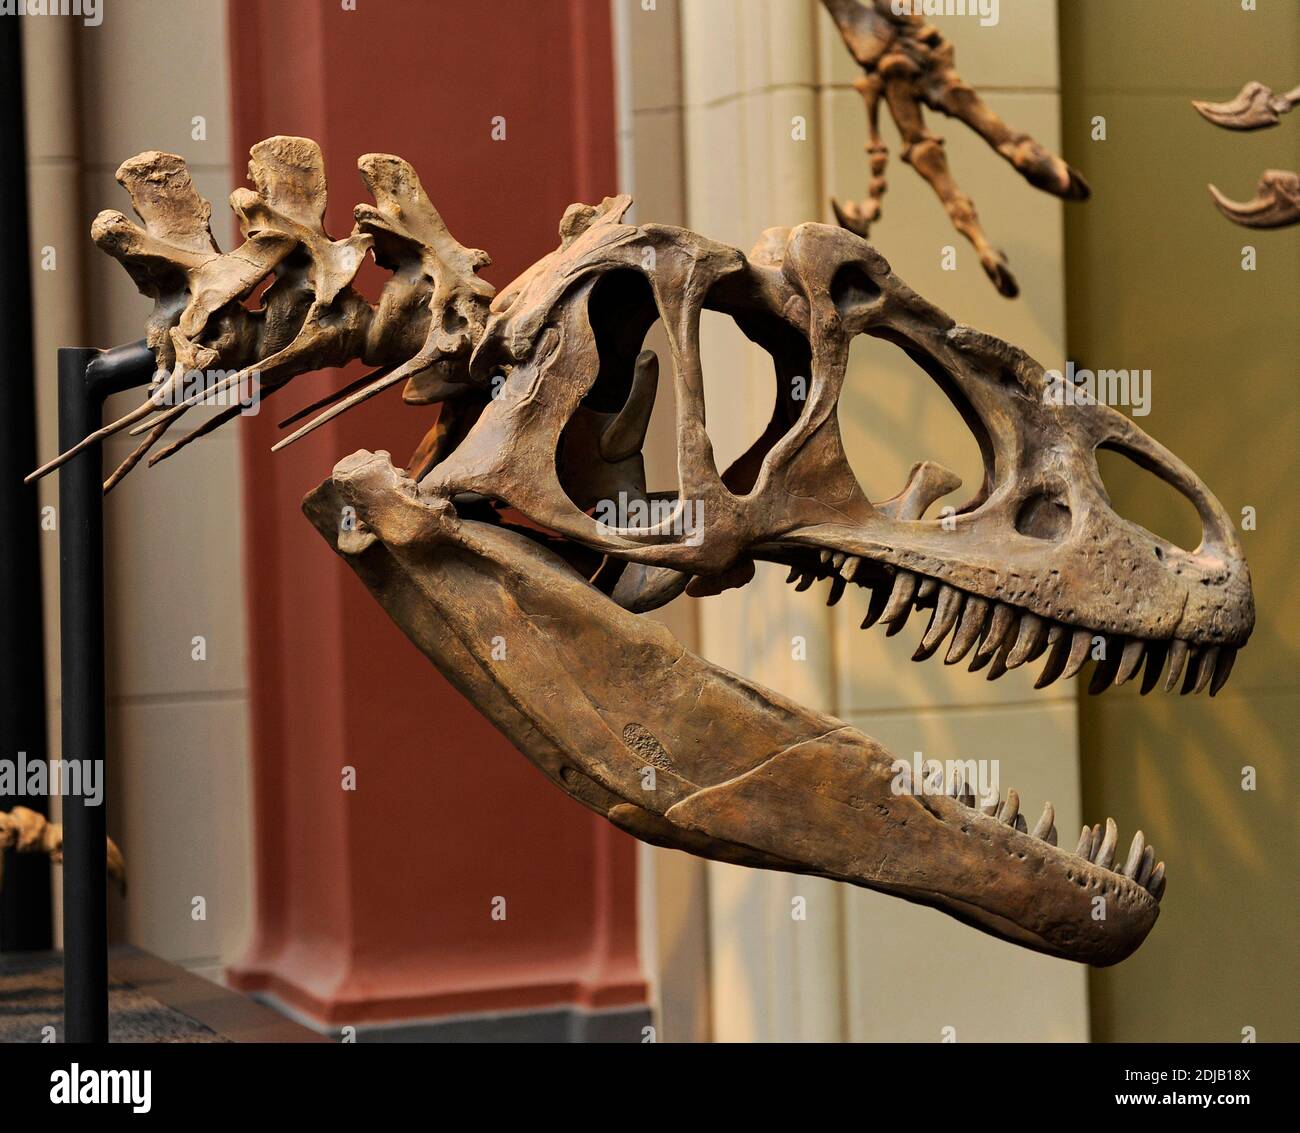 Allosaurus. Genus of carnivorous theropod dinosaur that lived 155 to 145 million years ago. Late Jurassic Period. Bipedal predador.  Skull with a large and serrated teeth. Natural History Museum, Berlin. Germany. Stock Photo